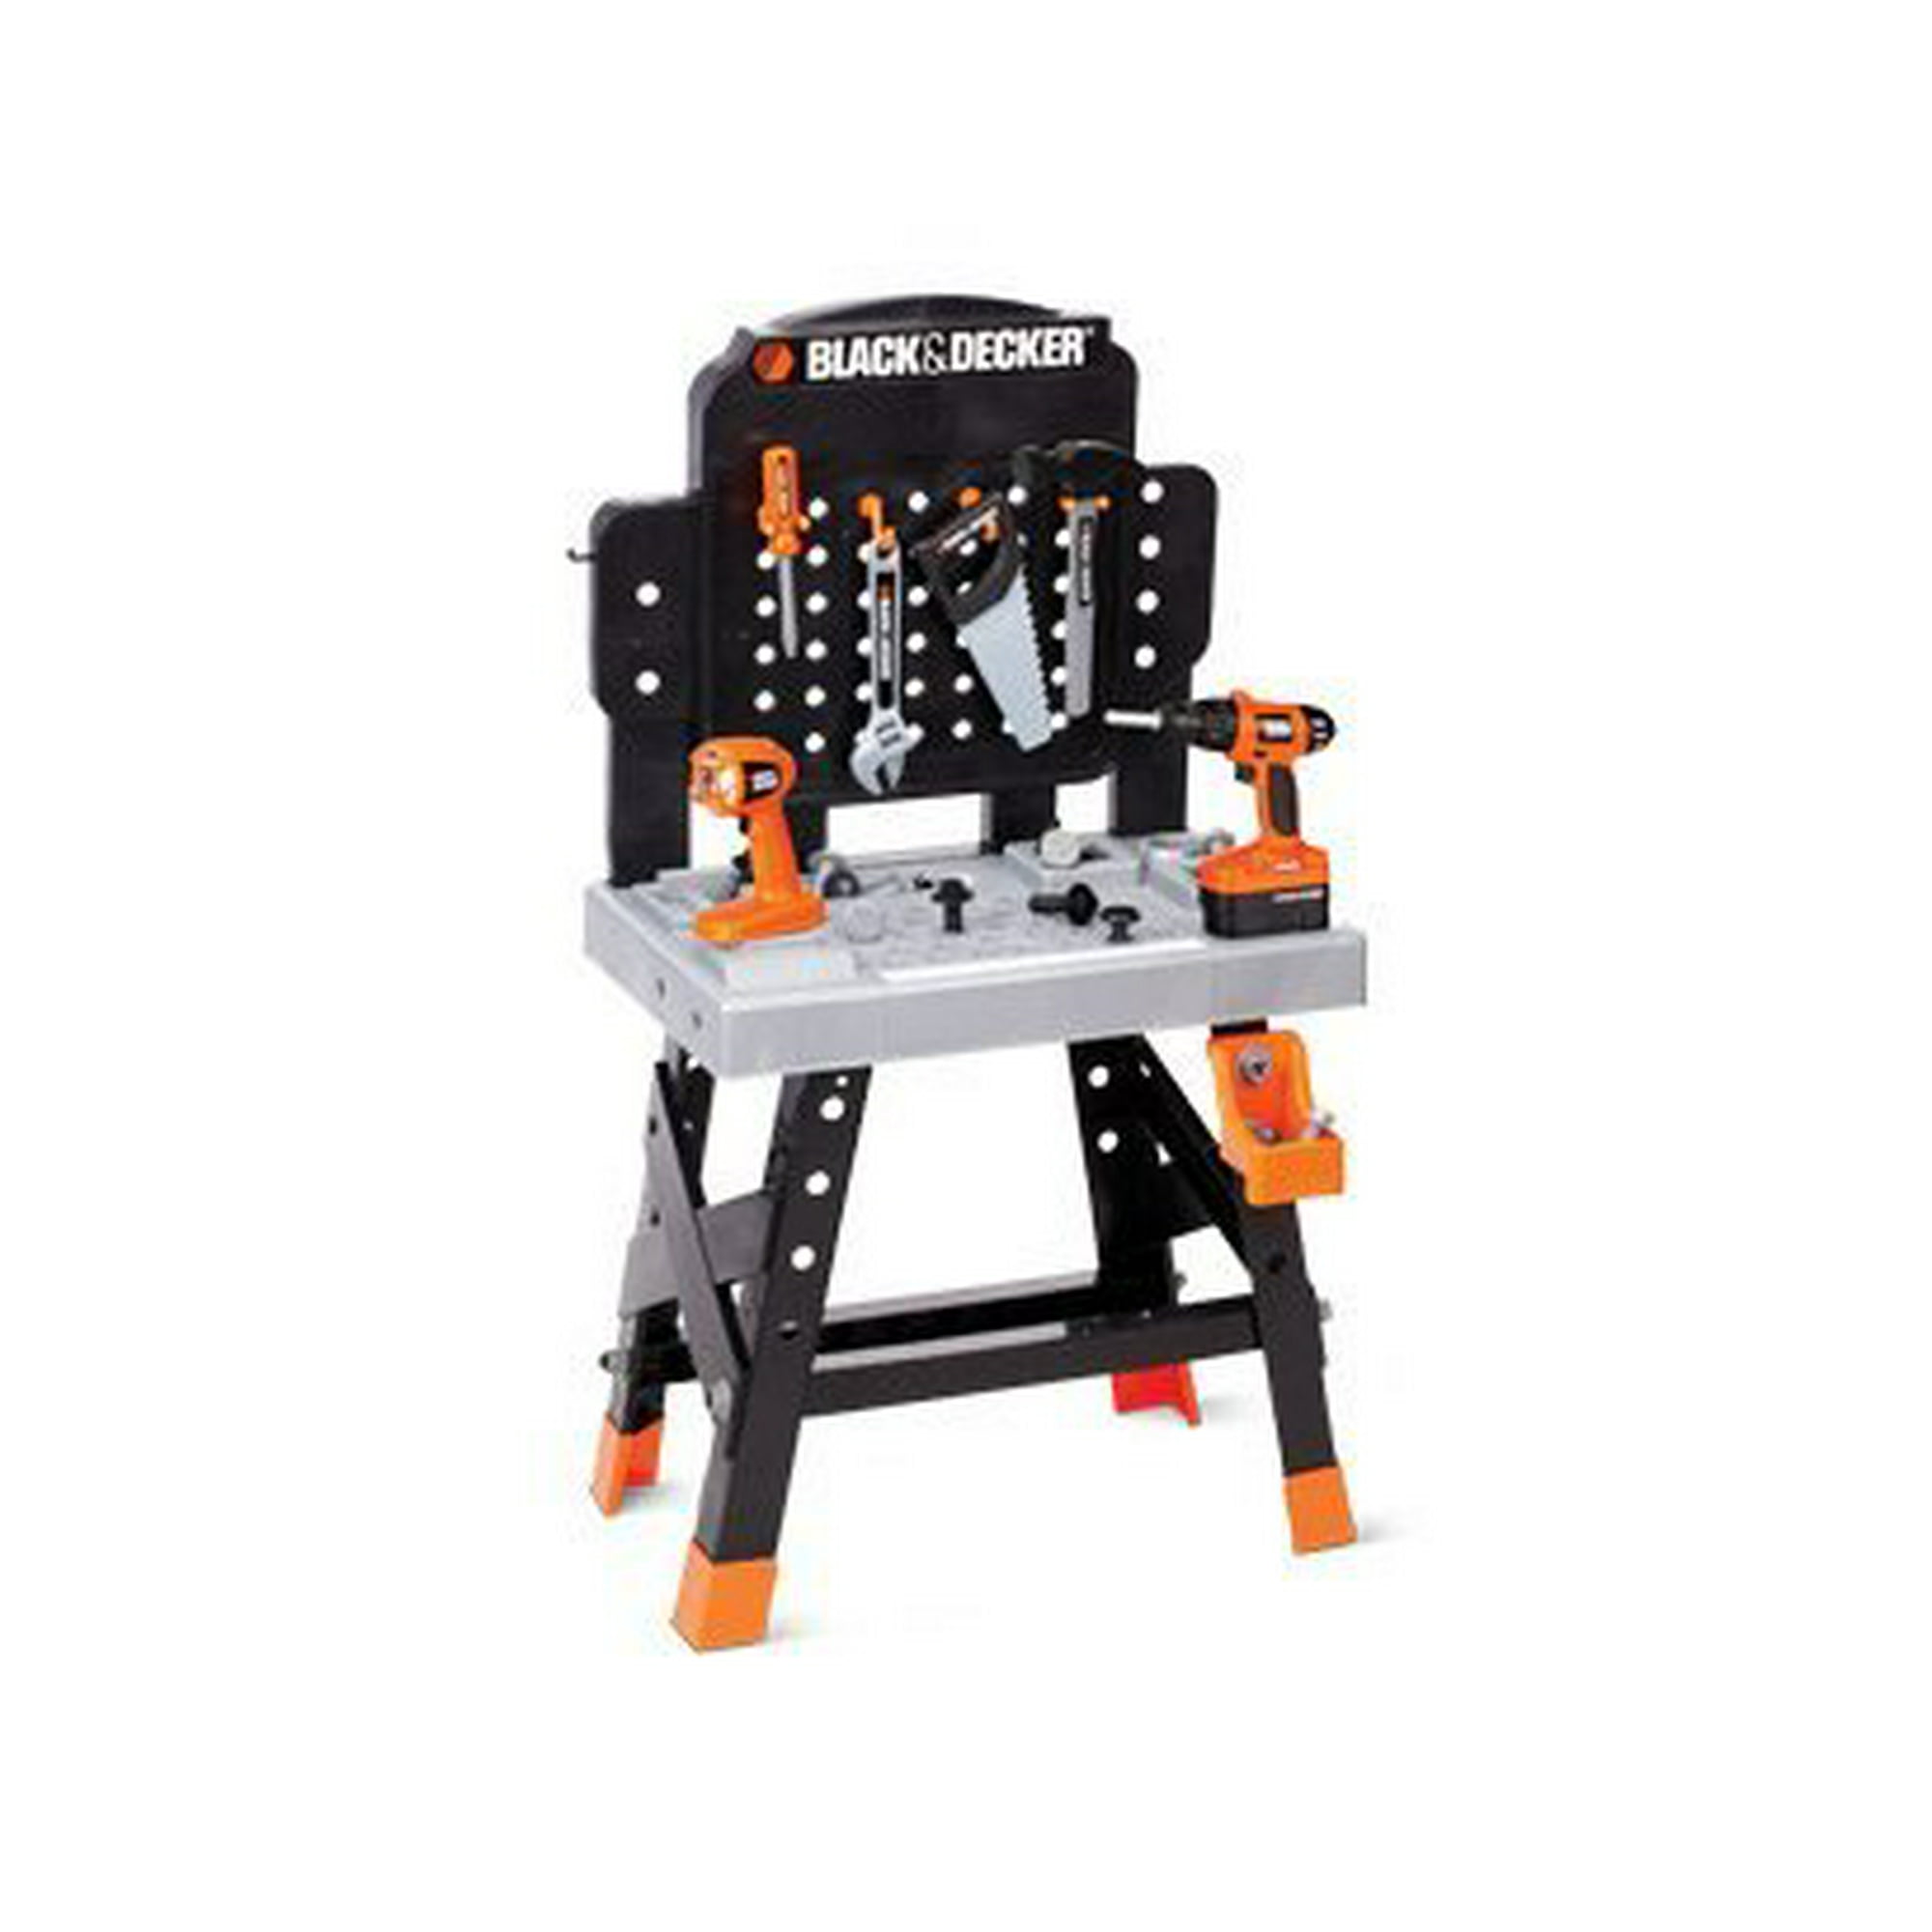 Black And Decker Junior Ready To Build Work Bench With 53 Tool And Accessories Walmart Canada